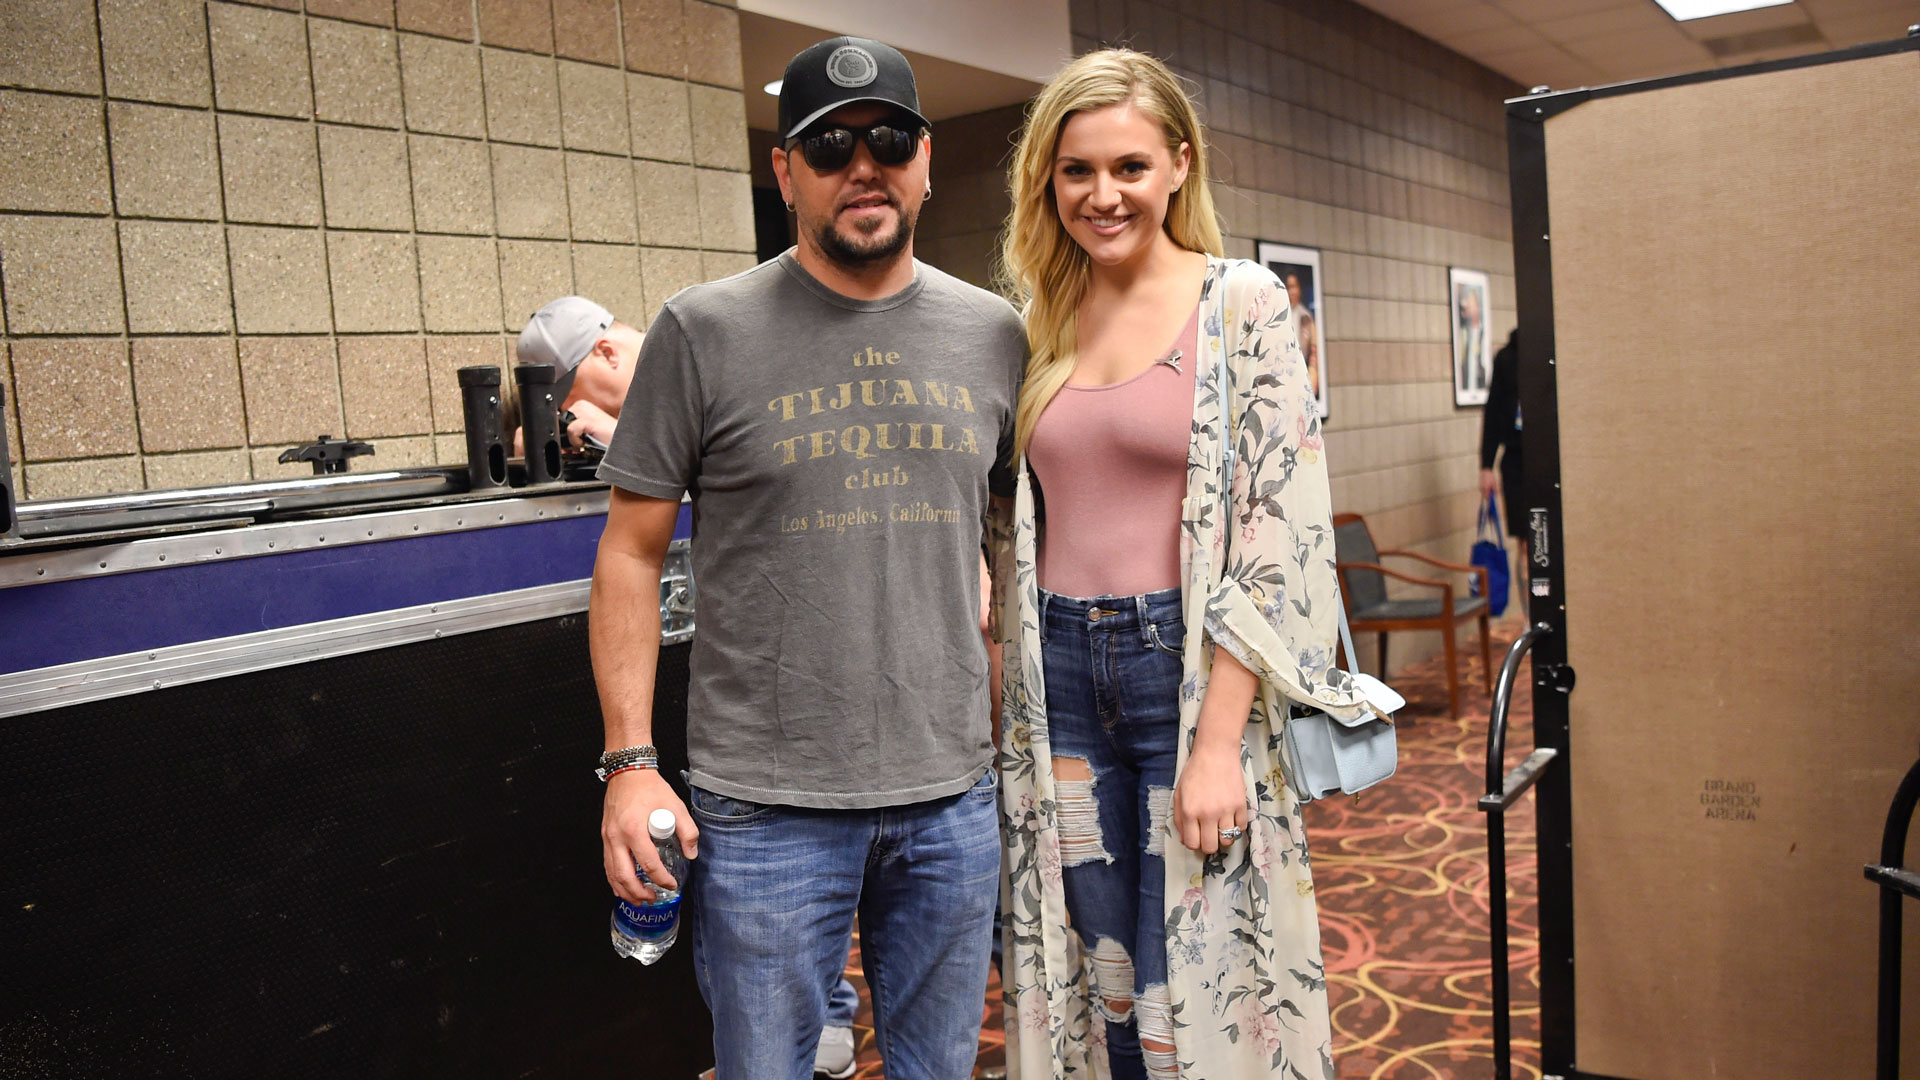 Jason Aldean poses with Kelsea Ballerini backstage in between run-throughs for Sunday's show.